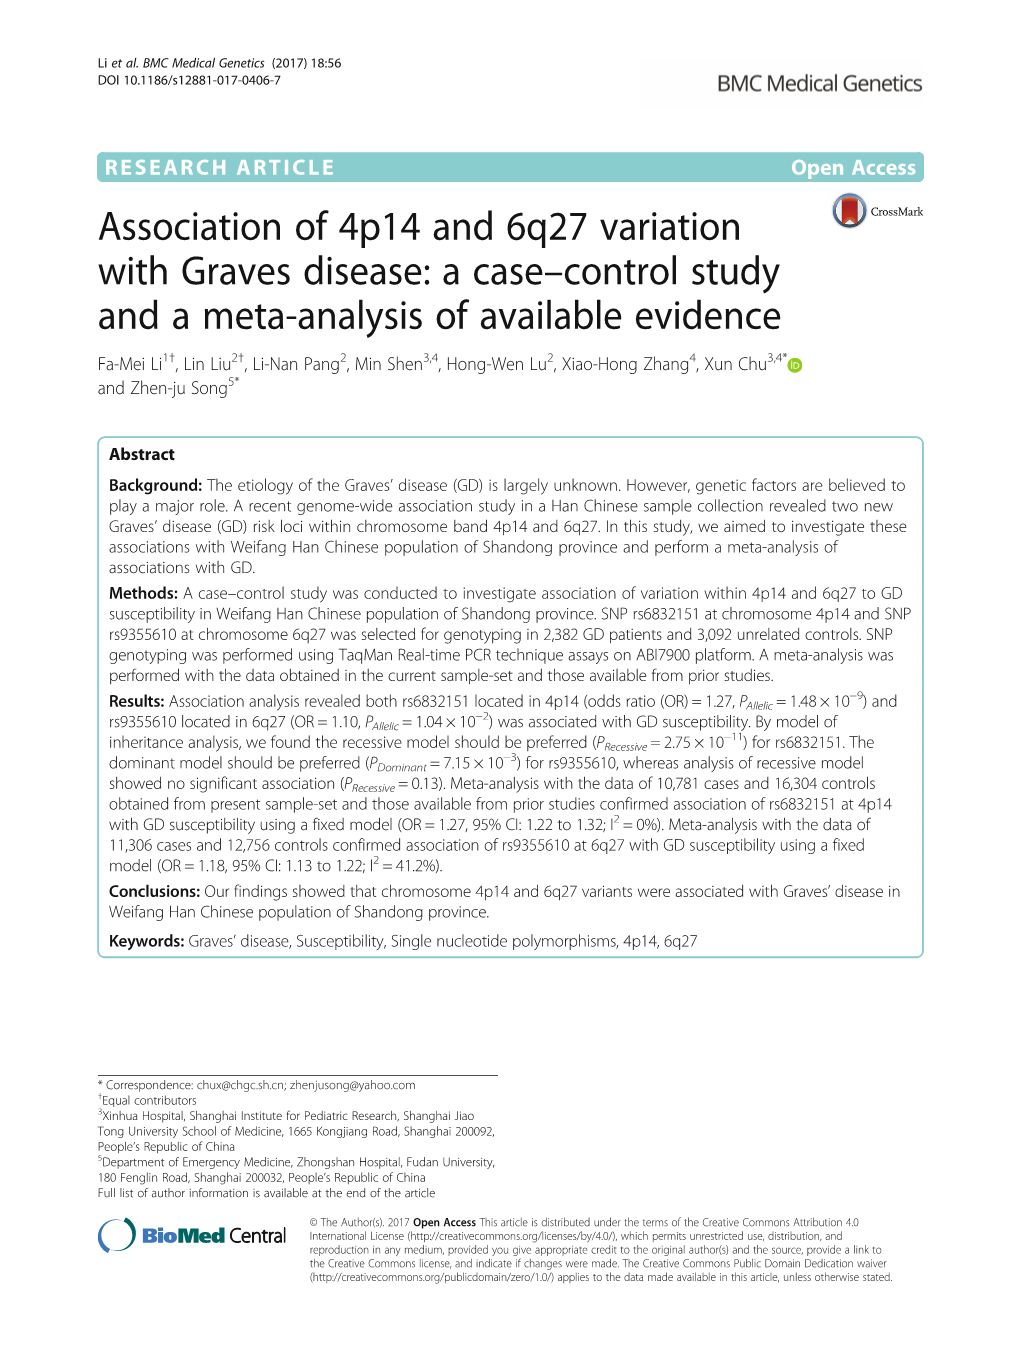 Association of 4P14 and 6Q27 Variation